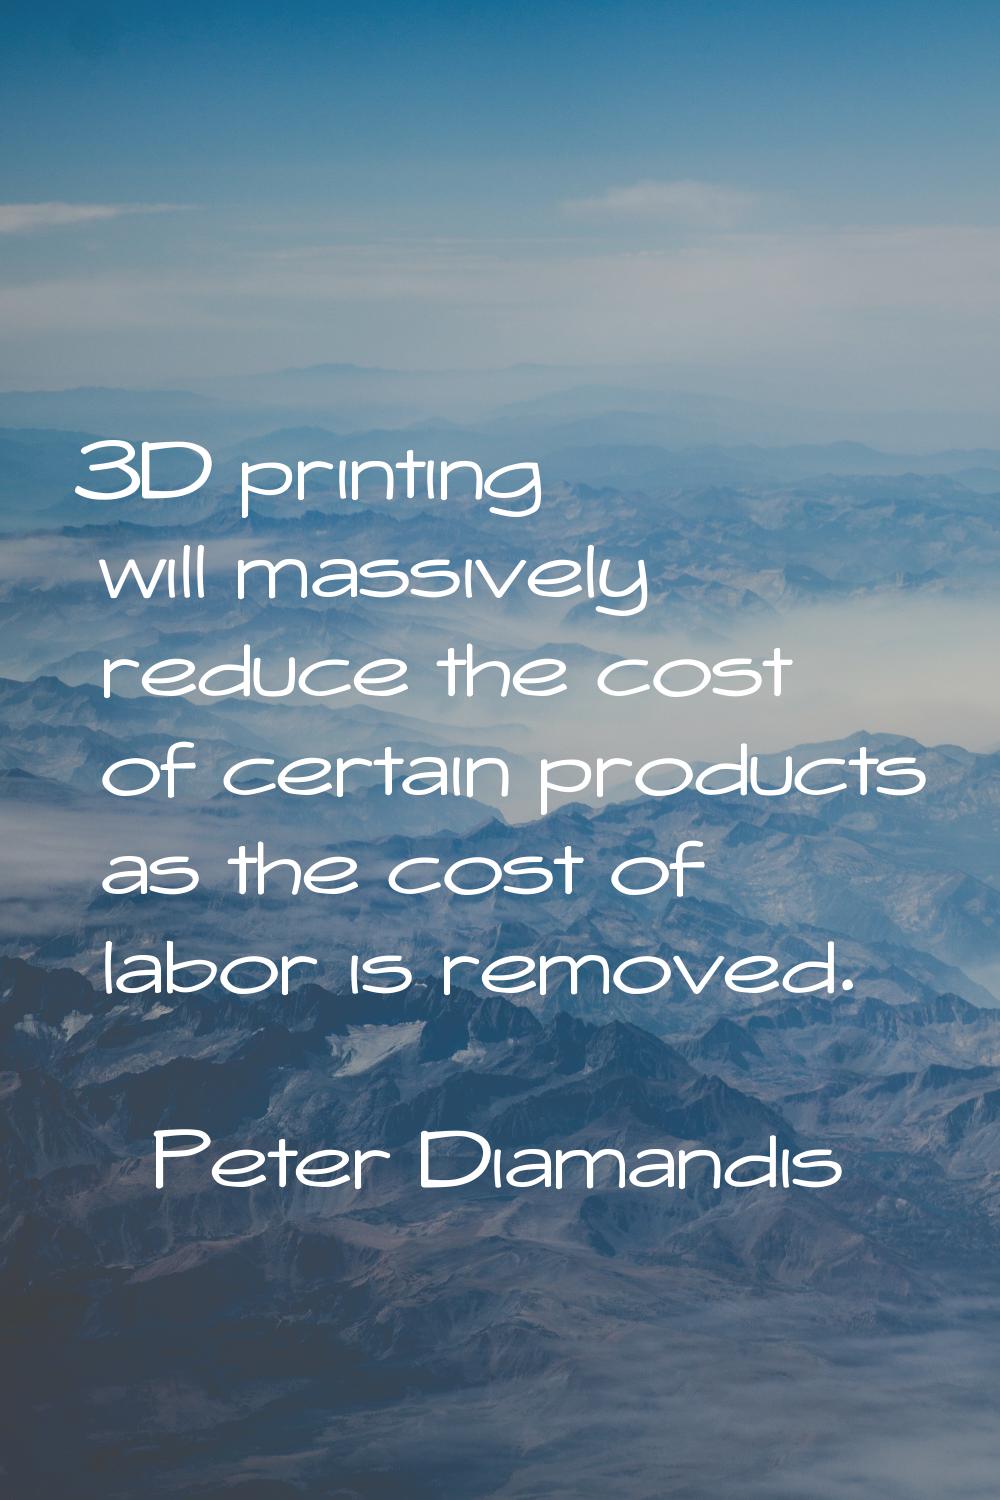 3D printing will massively reduce the cost of certain products as the cost of labor is removed.